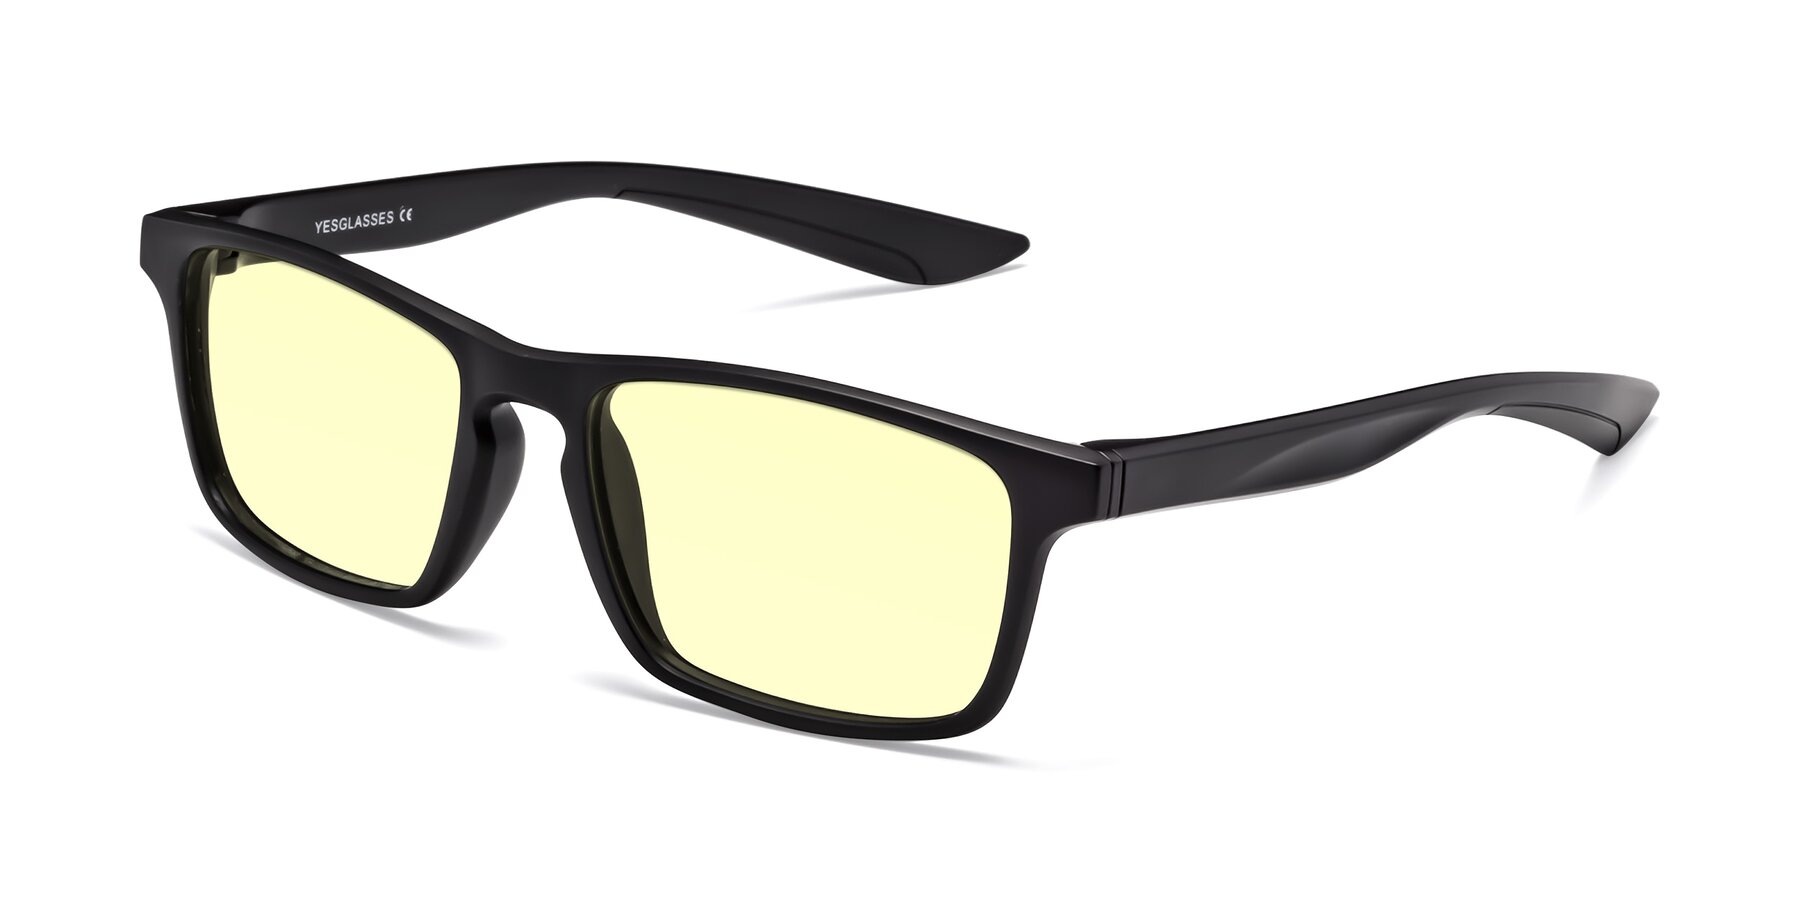 Angle of Passion in Matte Black with Light Yellow Tinted Lenses